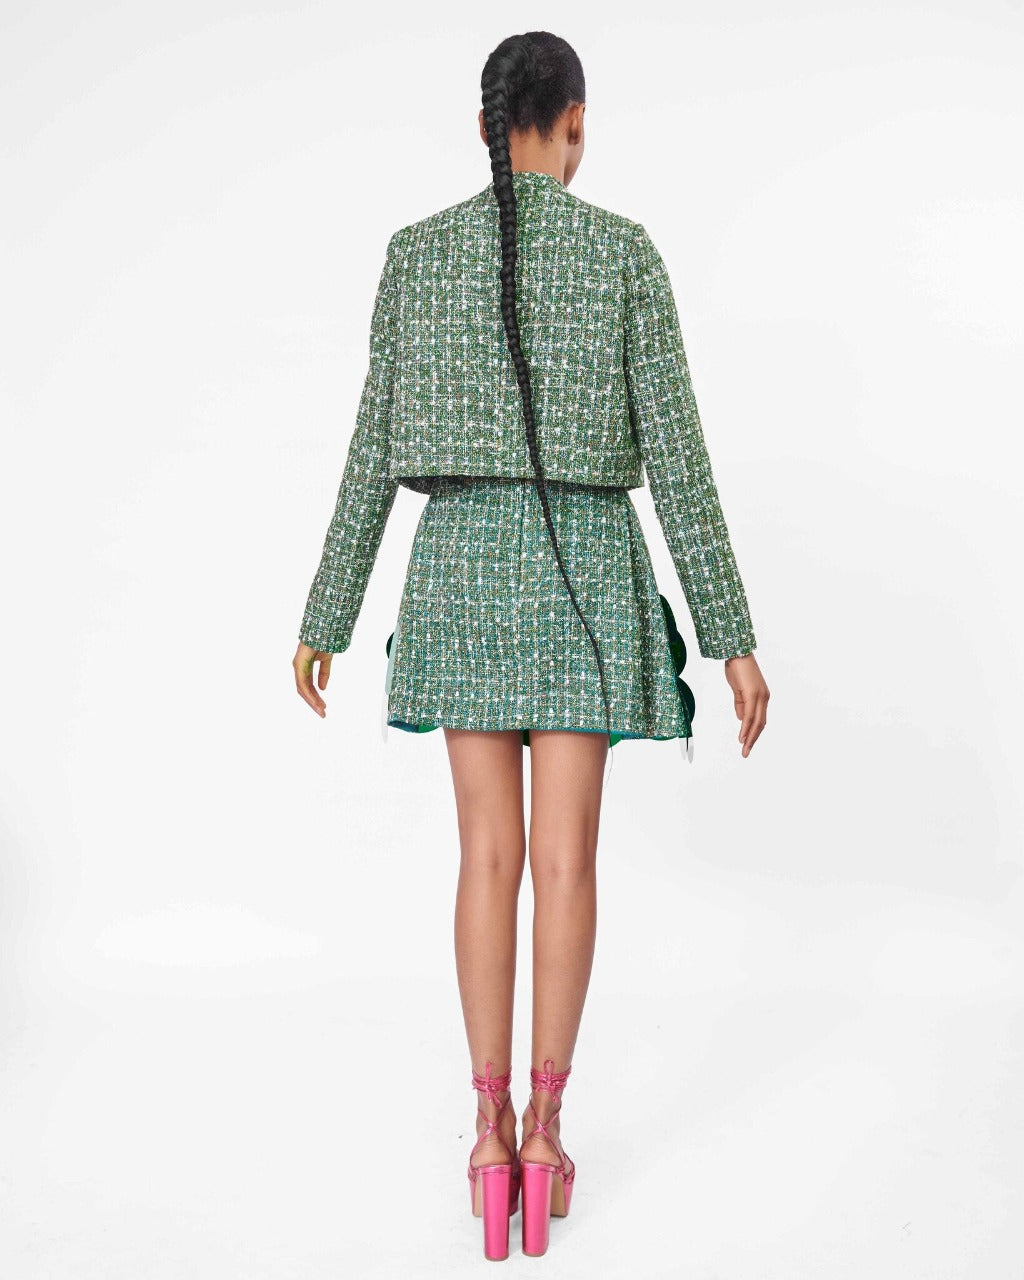 The back of A model wearing a Green, long sleeve crop jacket and Green high waist mini skirt with sequins embellishment